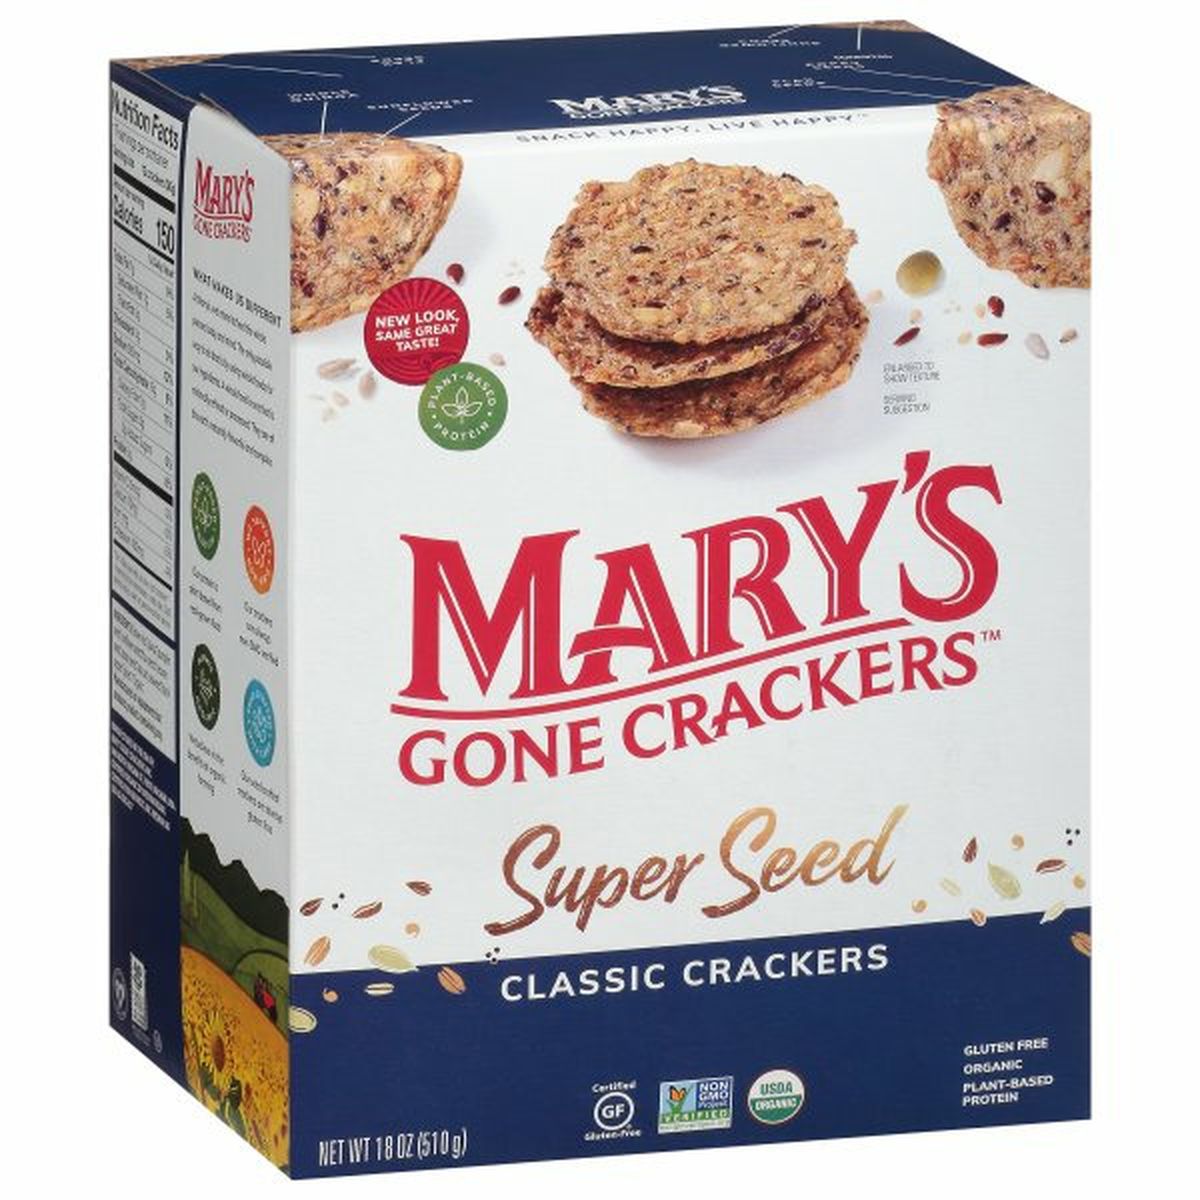 Calories in Mary's Gone Crackers Crackers, Classic, Super Seed